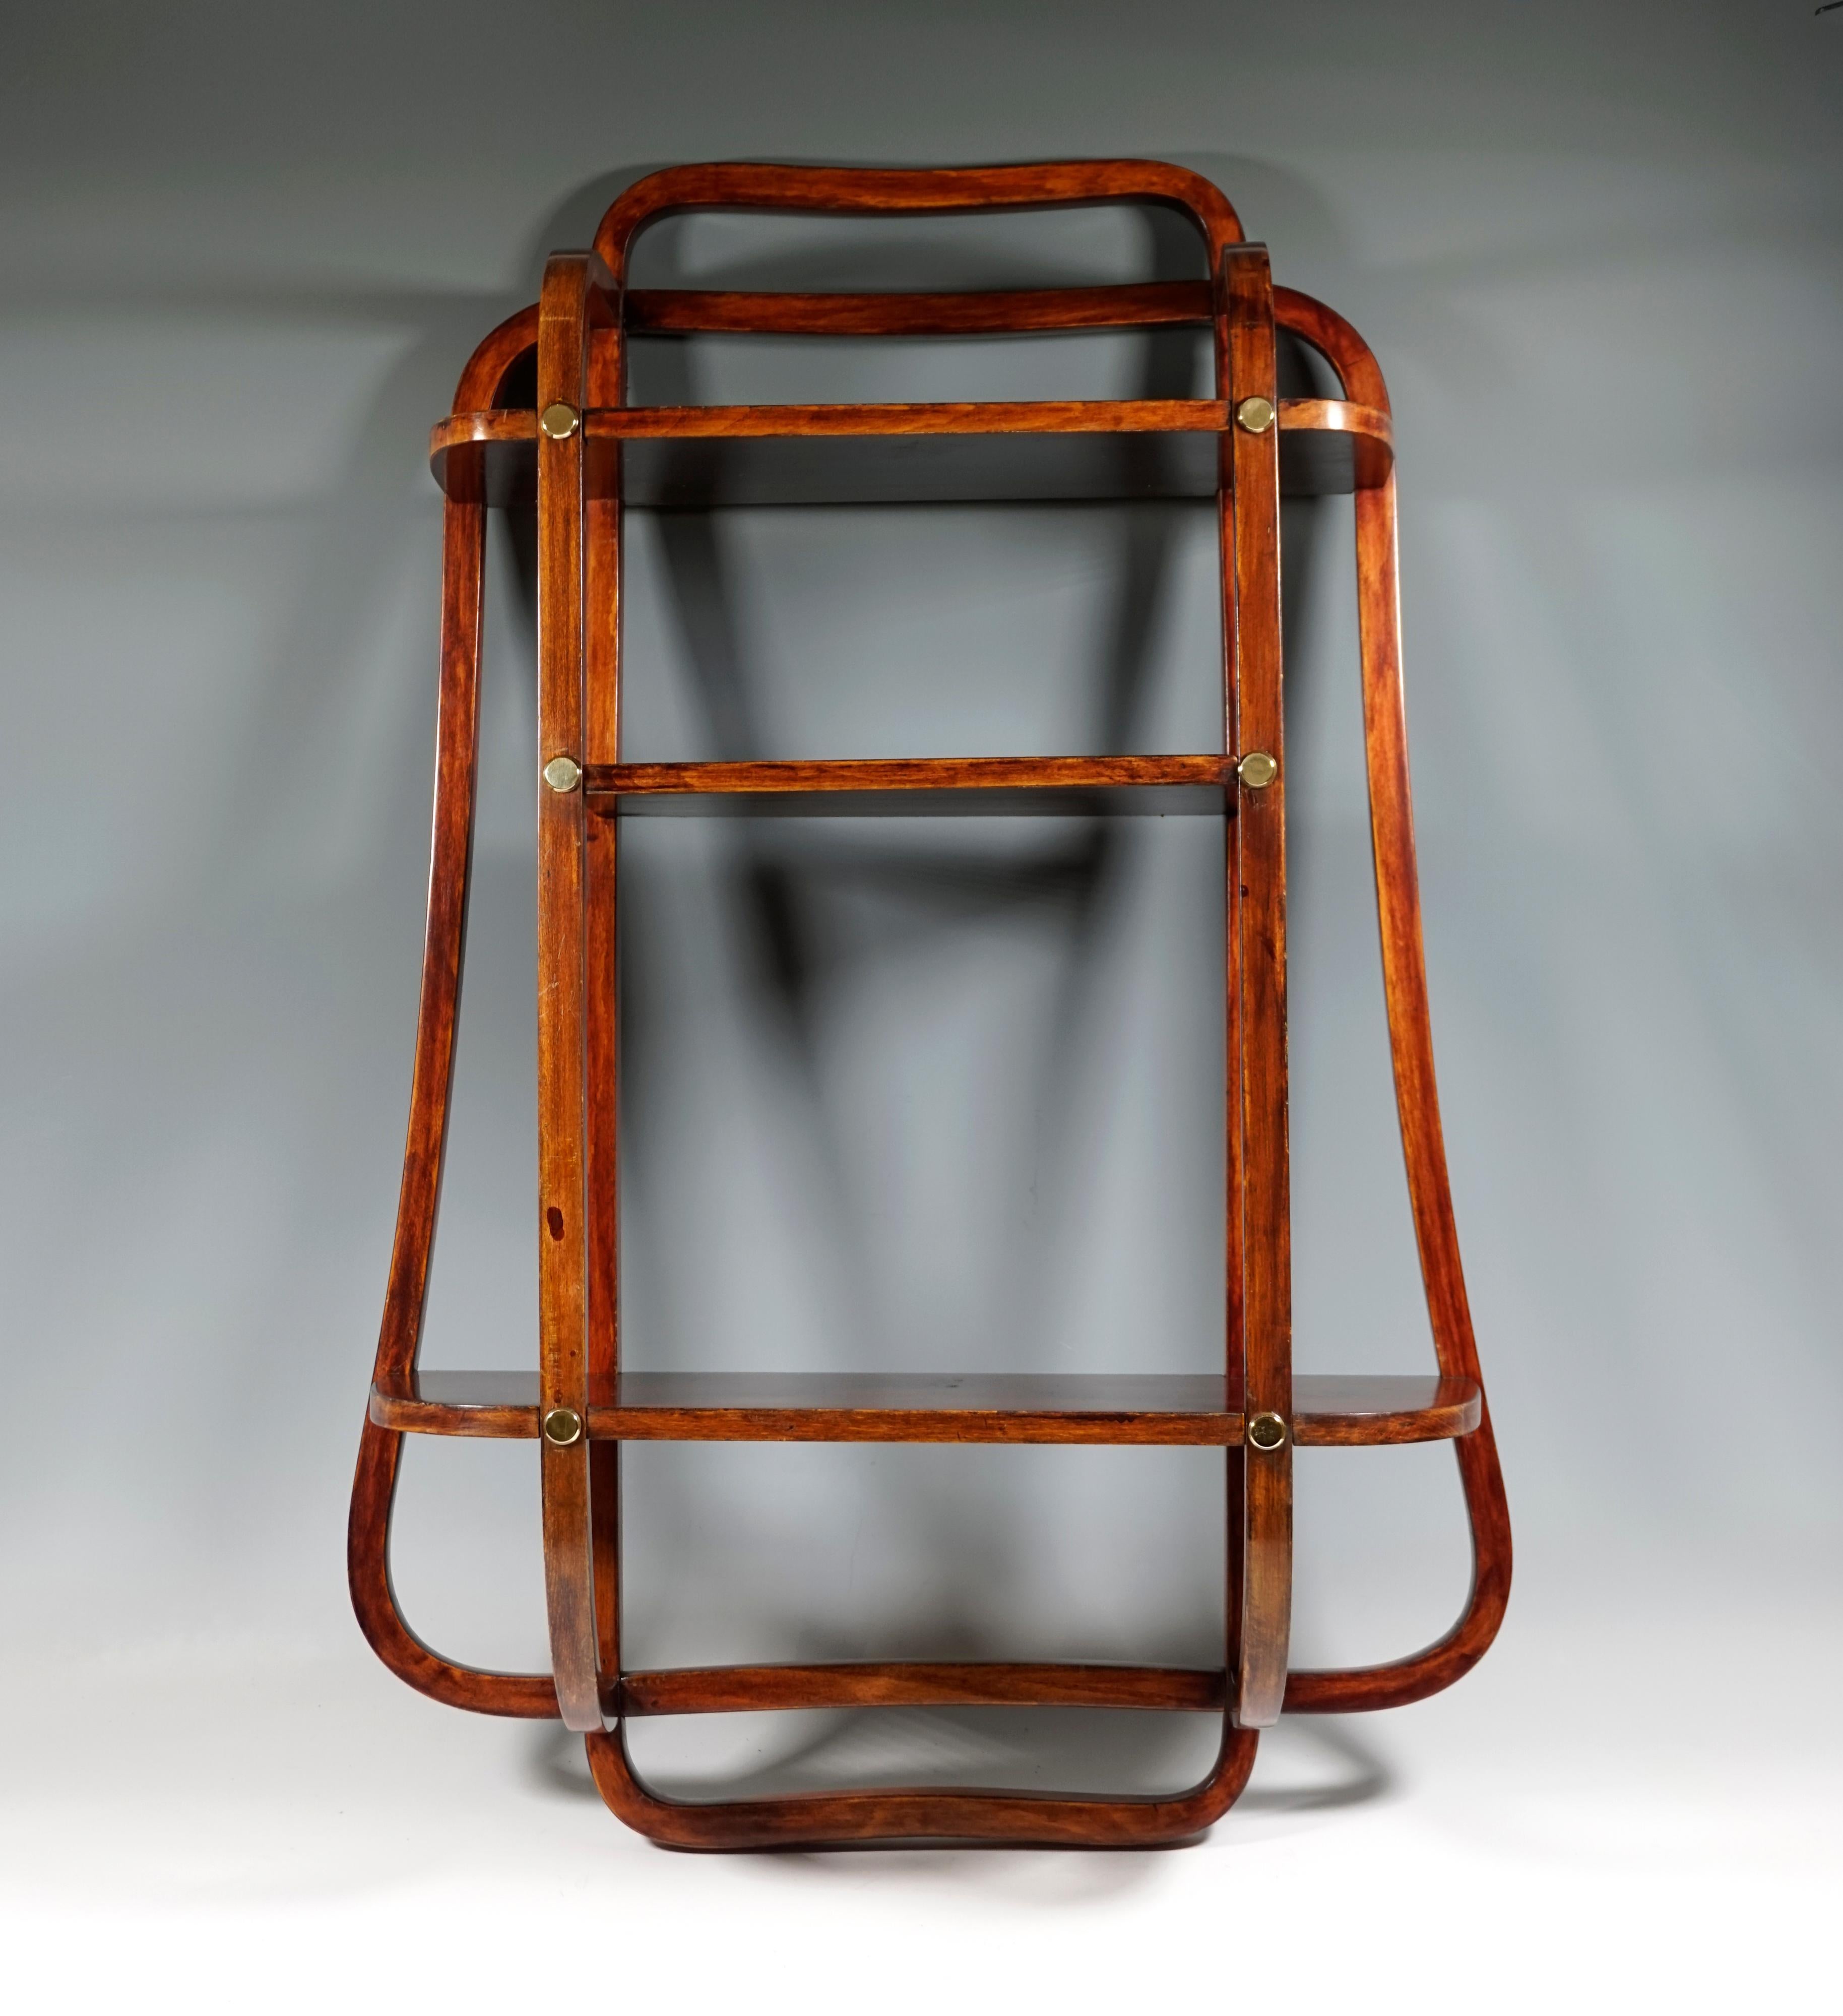 Elegantly shaped etagere with four large storage levels, the straight uprights slightly flared in the lowest area, decorative, openwork struts in the form of repeating stylized containers on the sides, a circumferential rail attached to the top